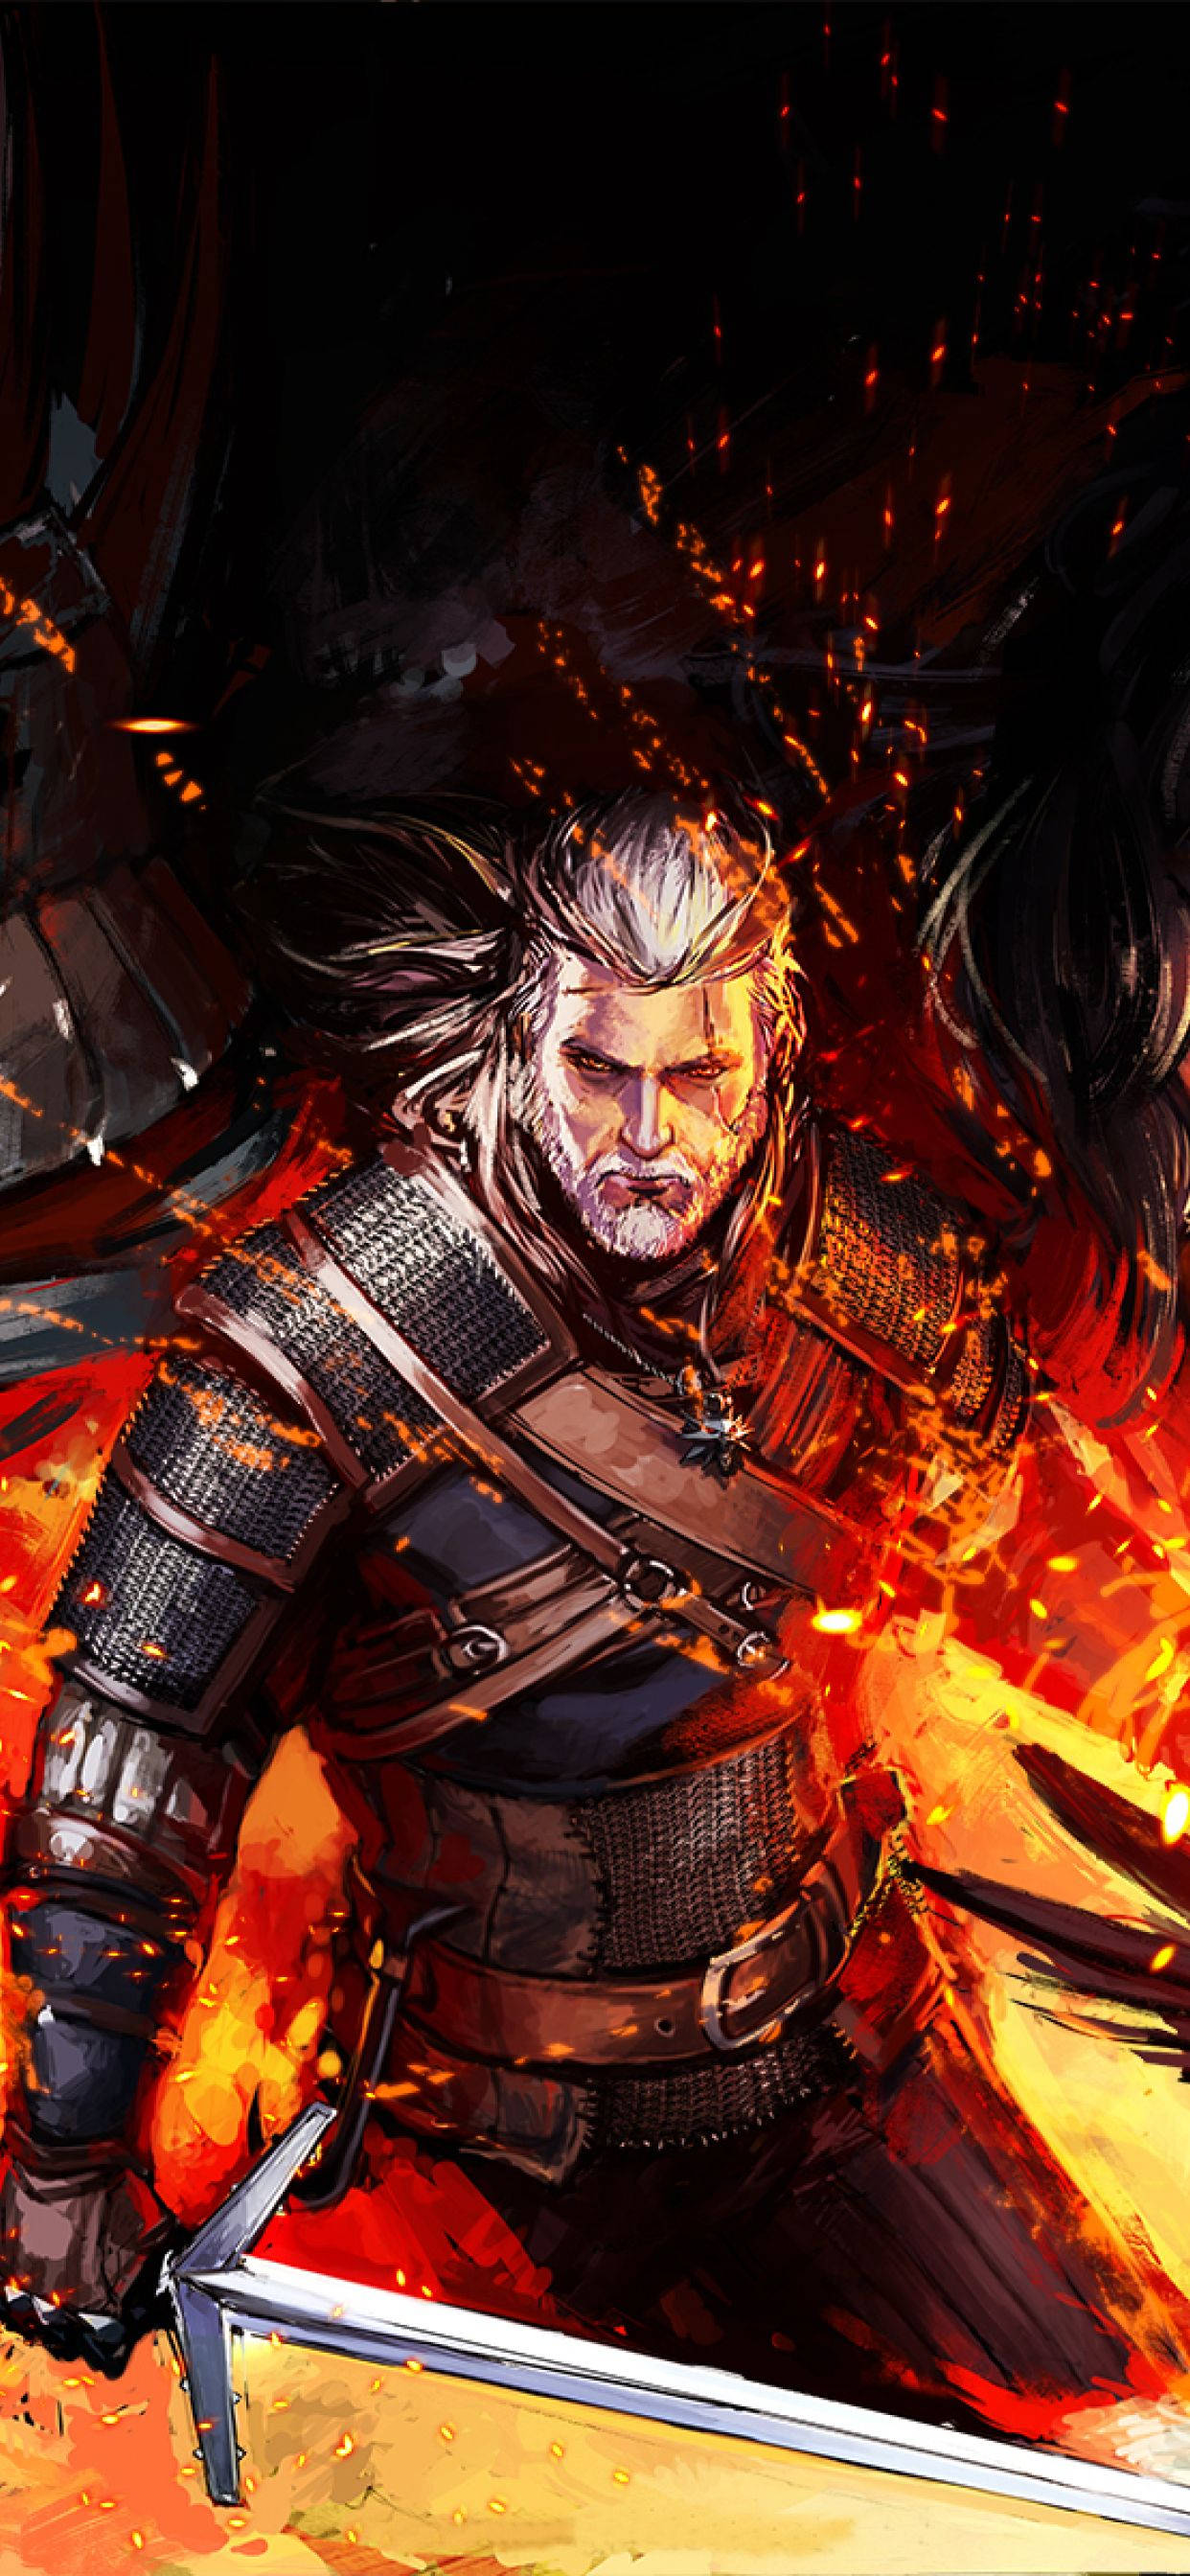 Geralt Using Igni In Witcher 3 Iphone Wallpaper